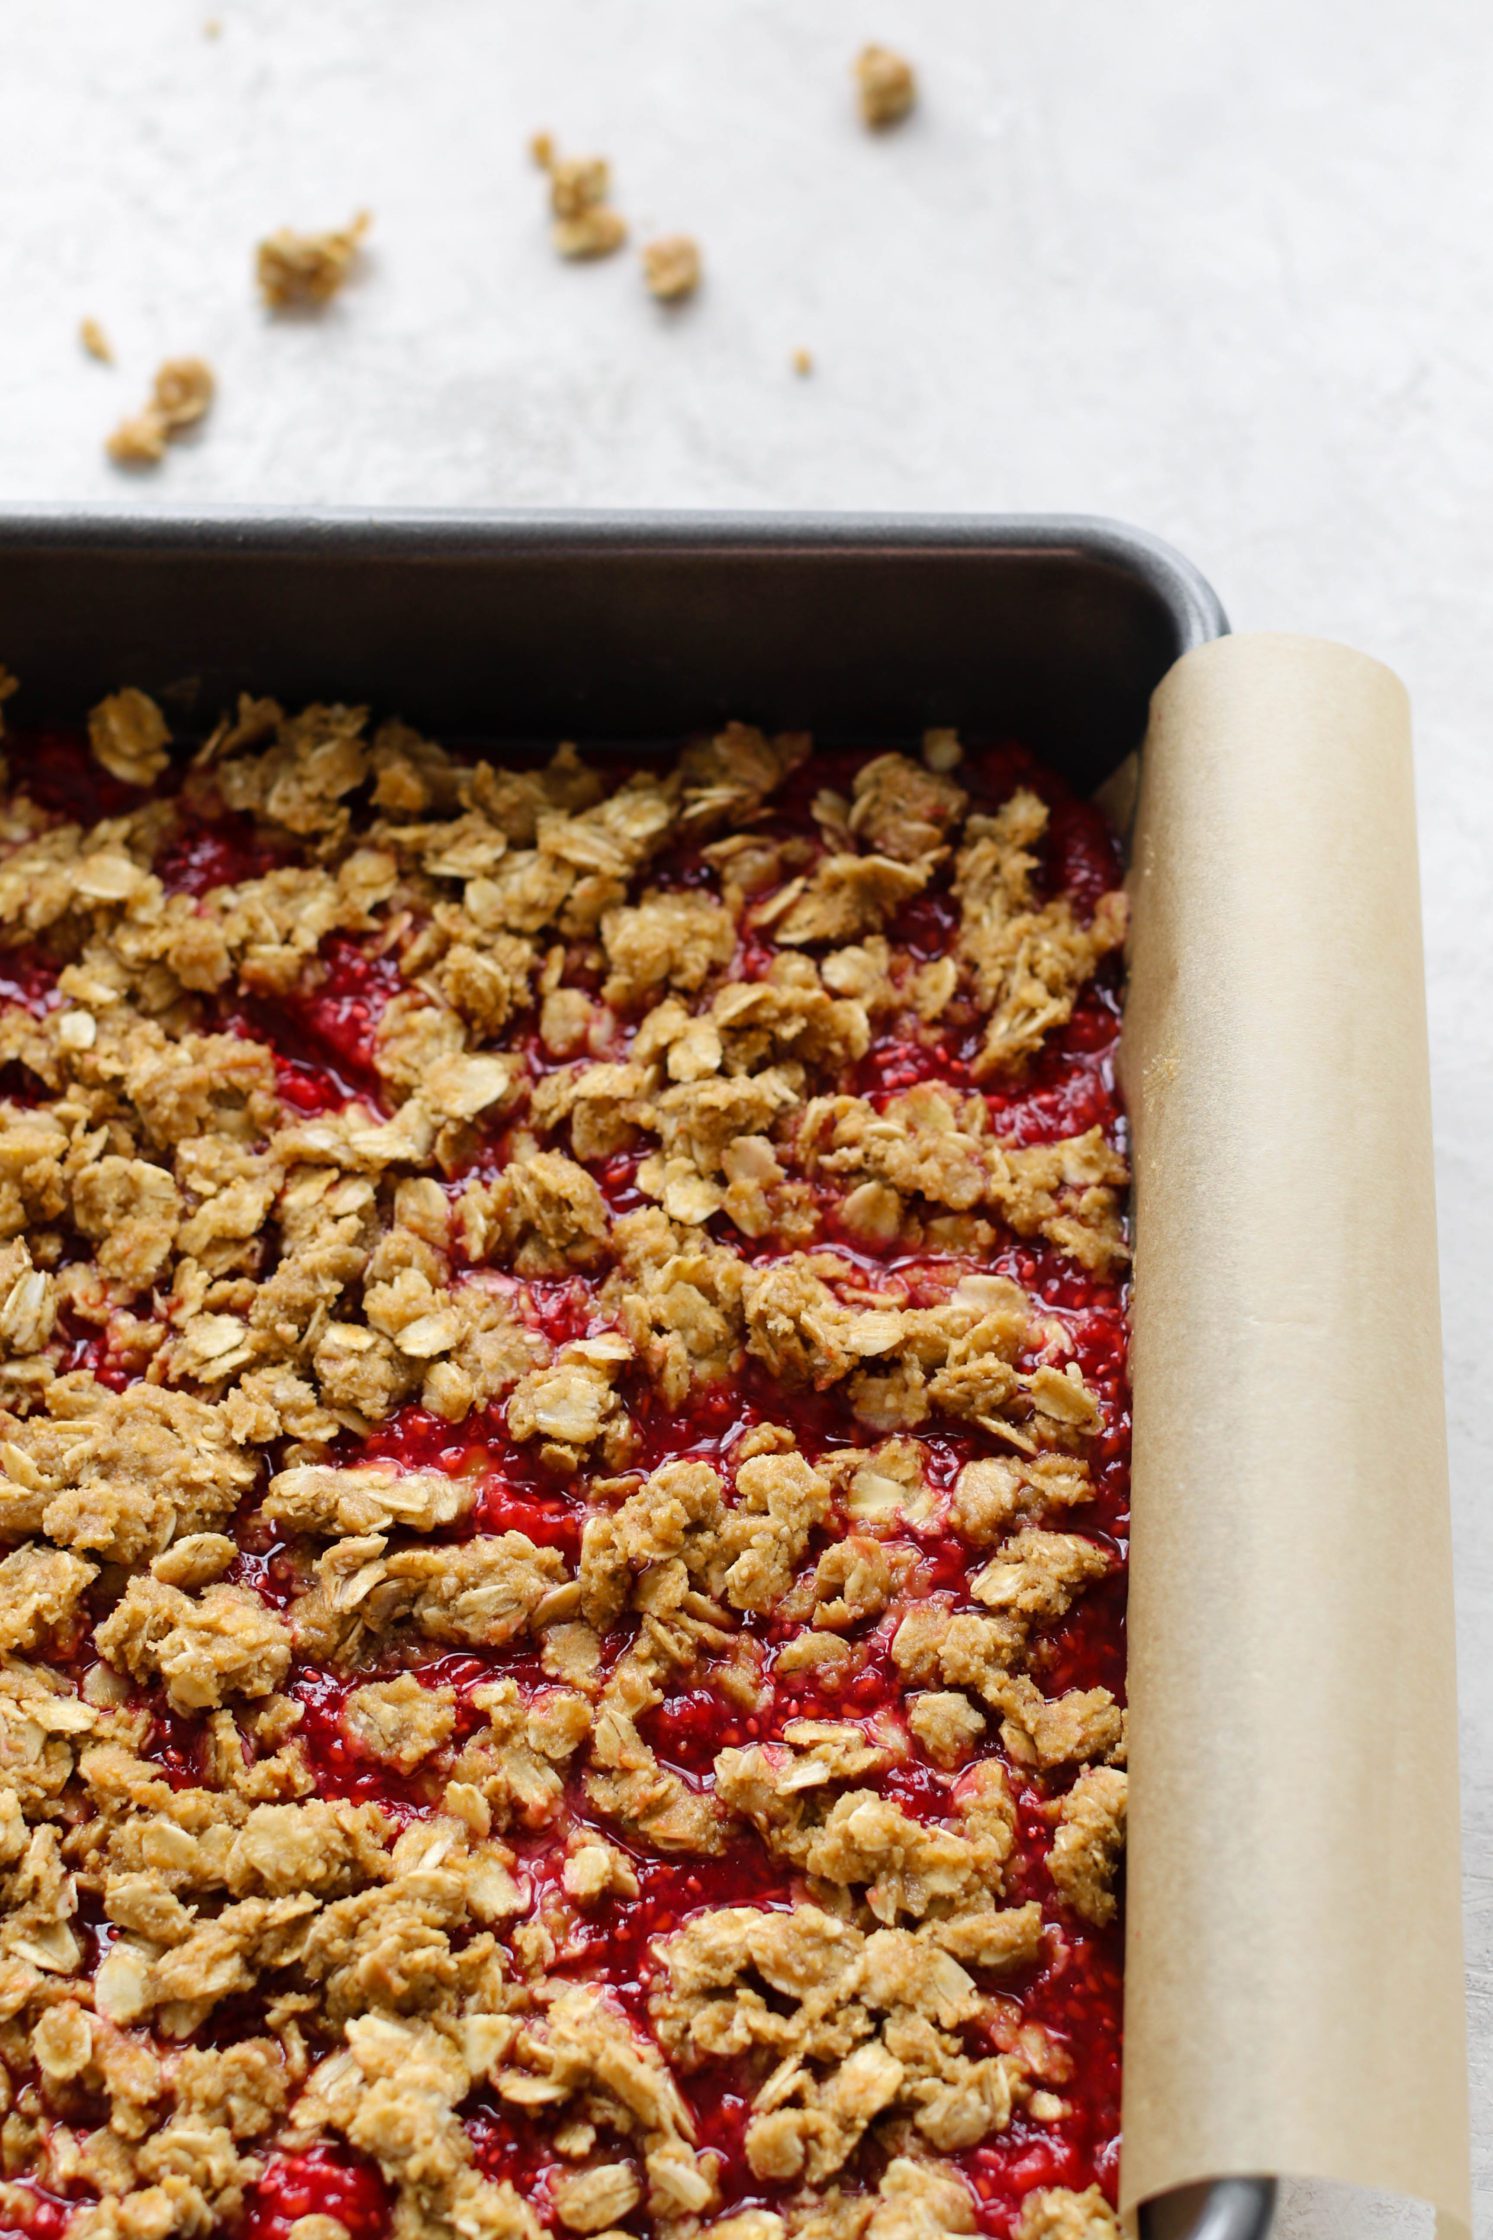 Raspberry Oat Crumble Bars unbaked in parchment lined baking pan by Flora & Vino